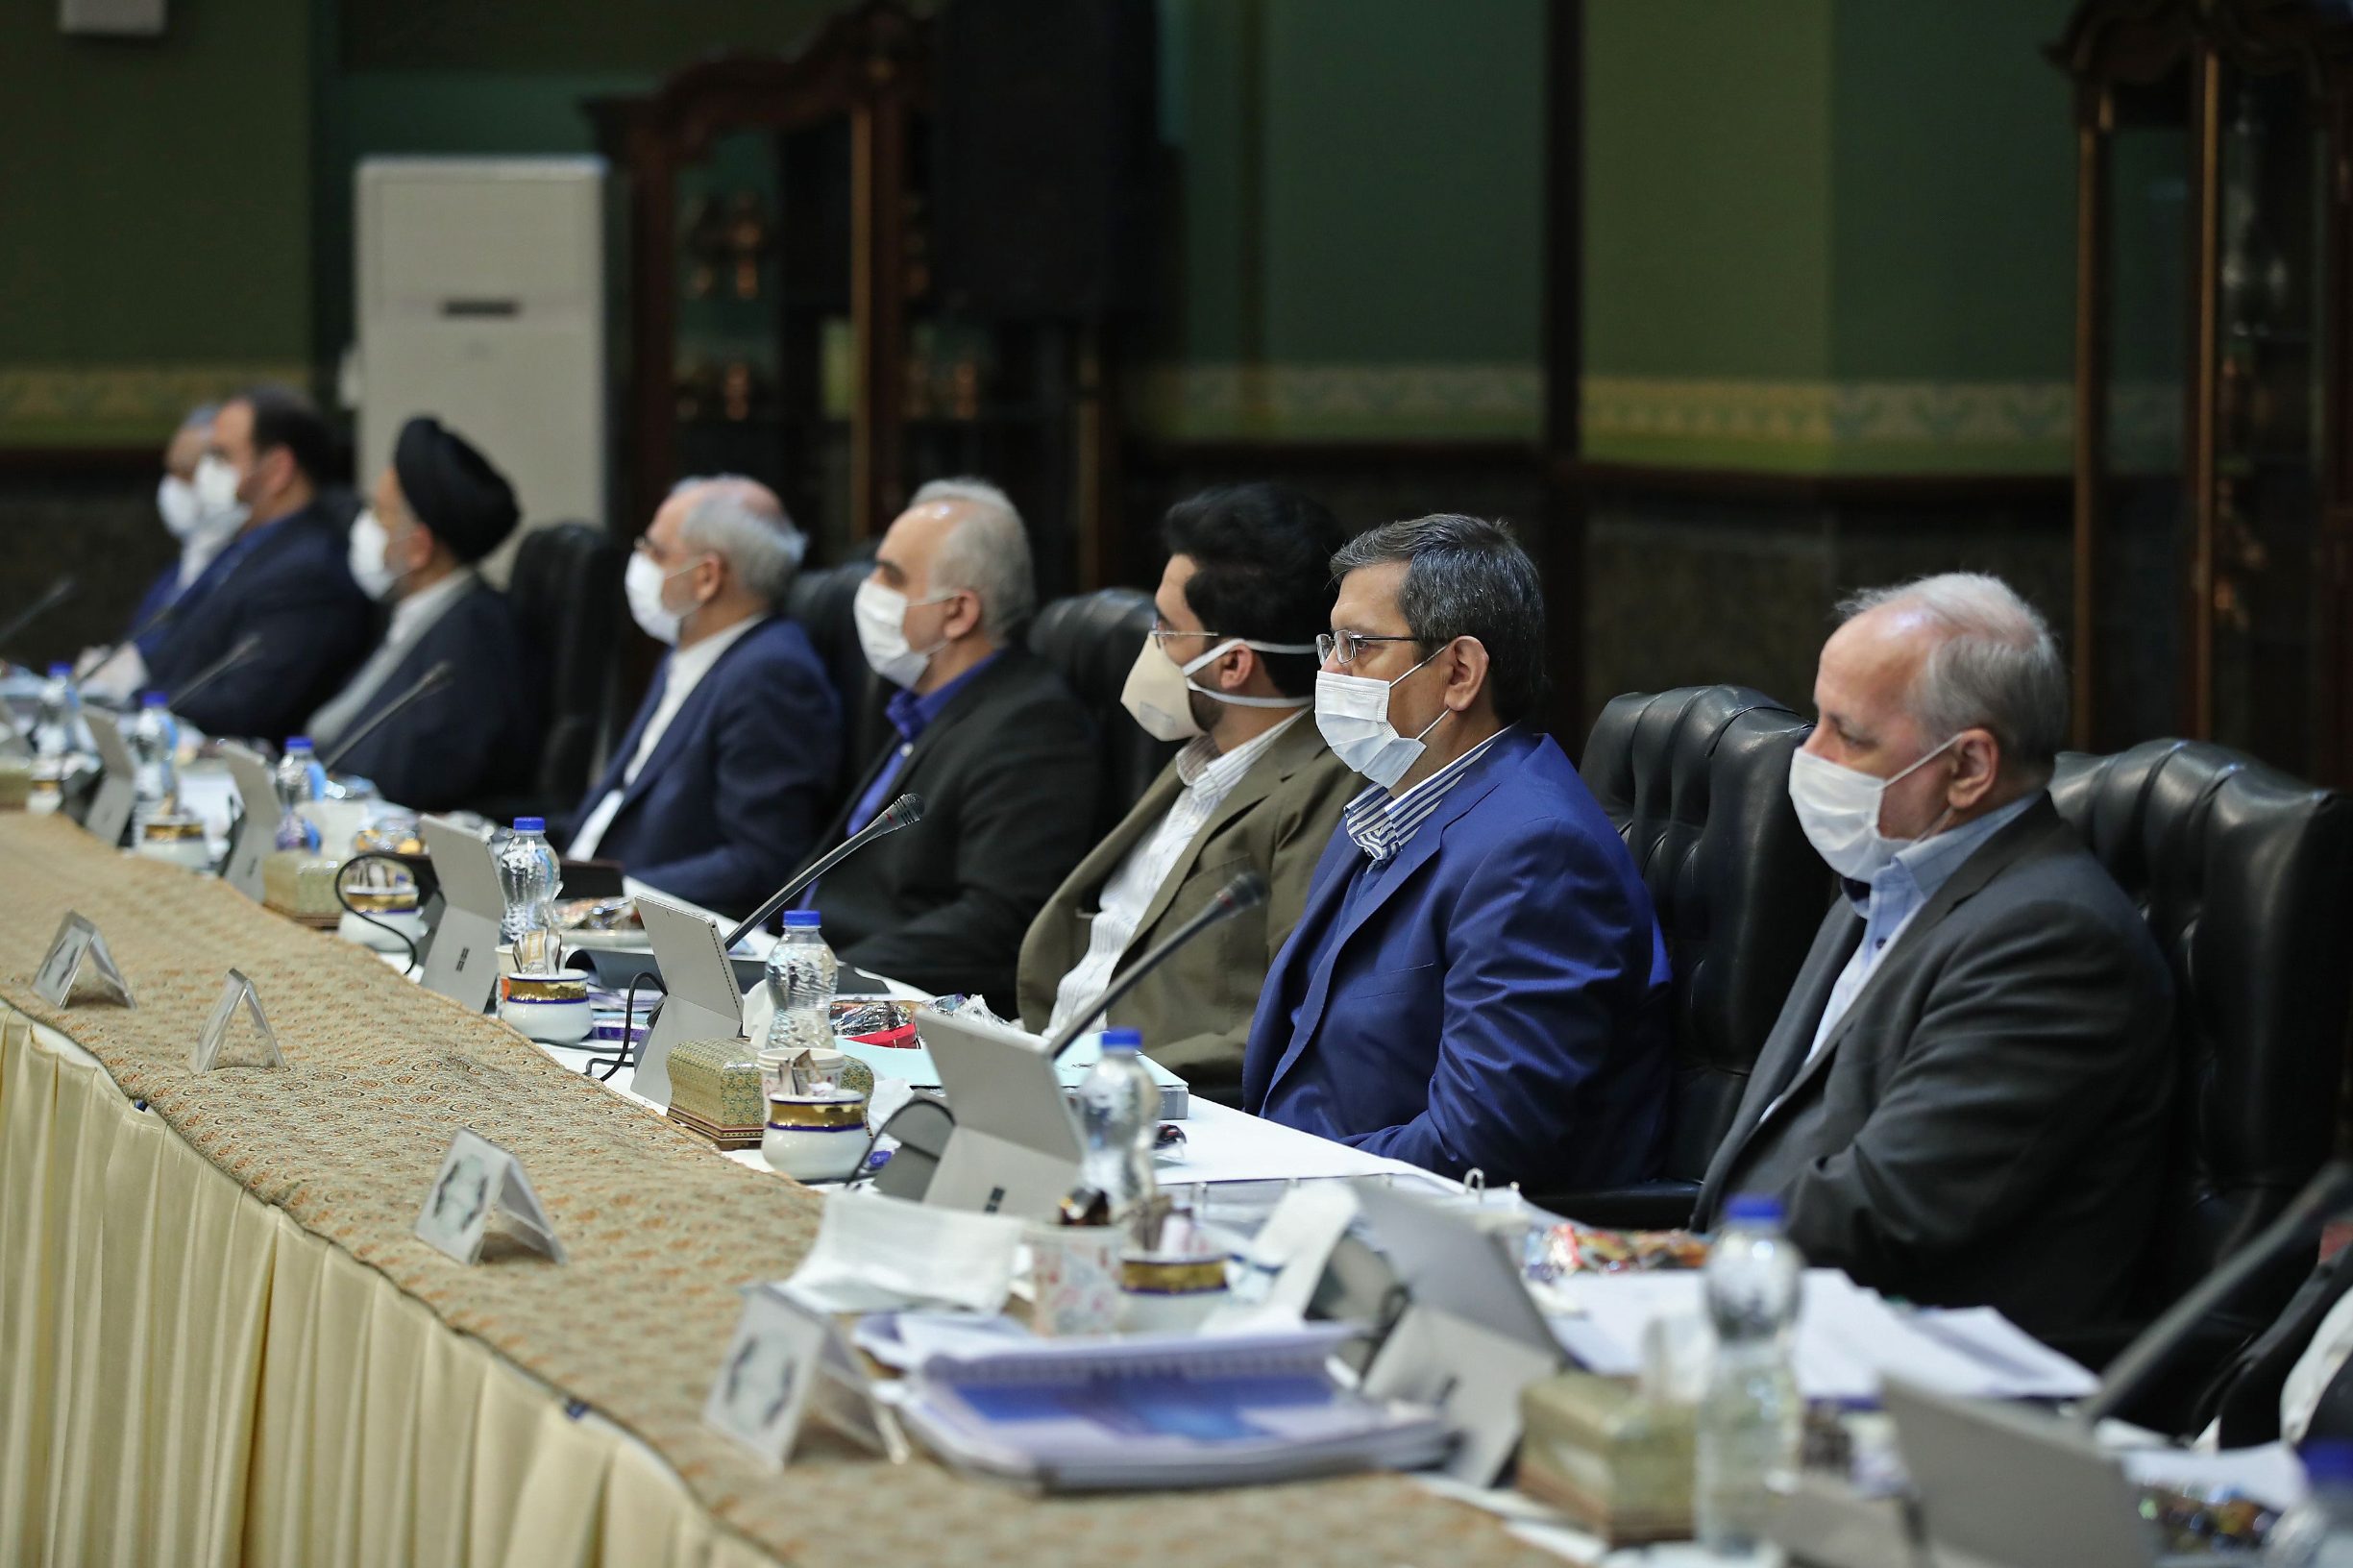 A handout picture provided by the Iranian presidency on March 25, 2020, shows Iranian cabinet members wearing protective masks during a cabinet session in the capital Tehran. - Iran will ban intercity travel within days as it finally gets tough with the coronavirus that has killed more than 2,000 people in one of the world's deadliest outbreaks, officials said Wednesday. (Photo by - / Iranian Presidency / AFP) / === RESTRICTED TO EDITORIAL USE - MANDATORY CREDIT 